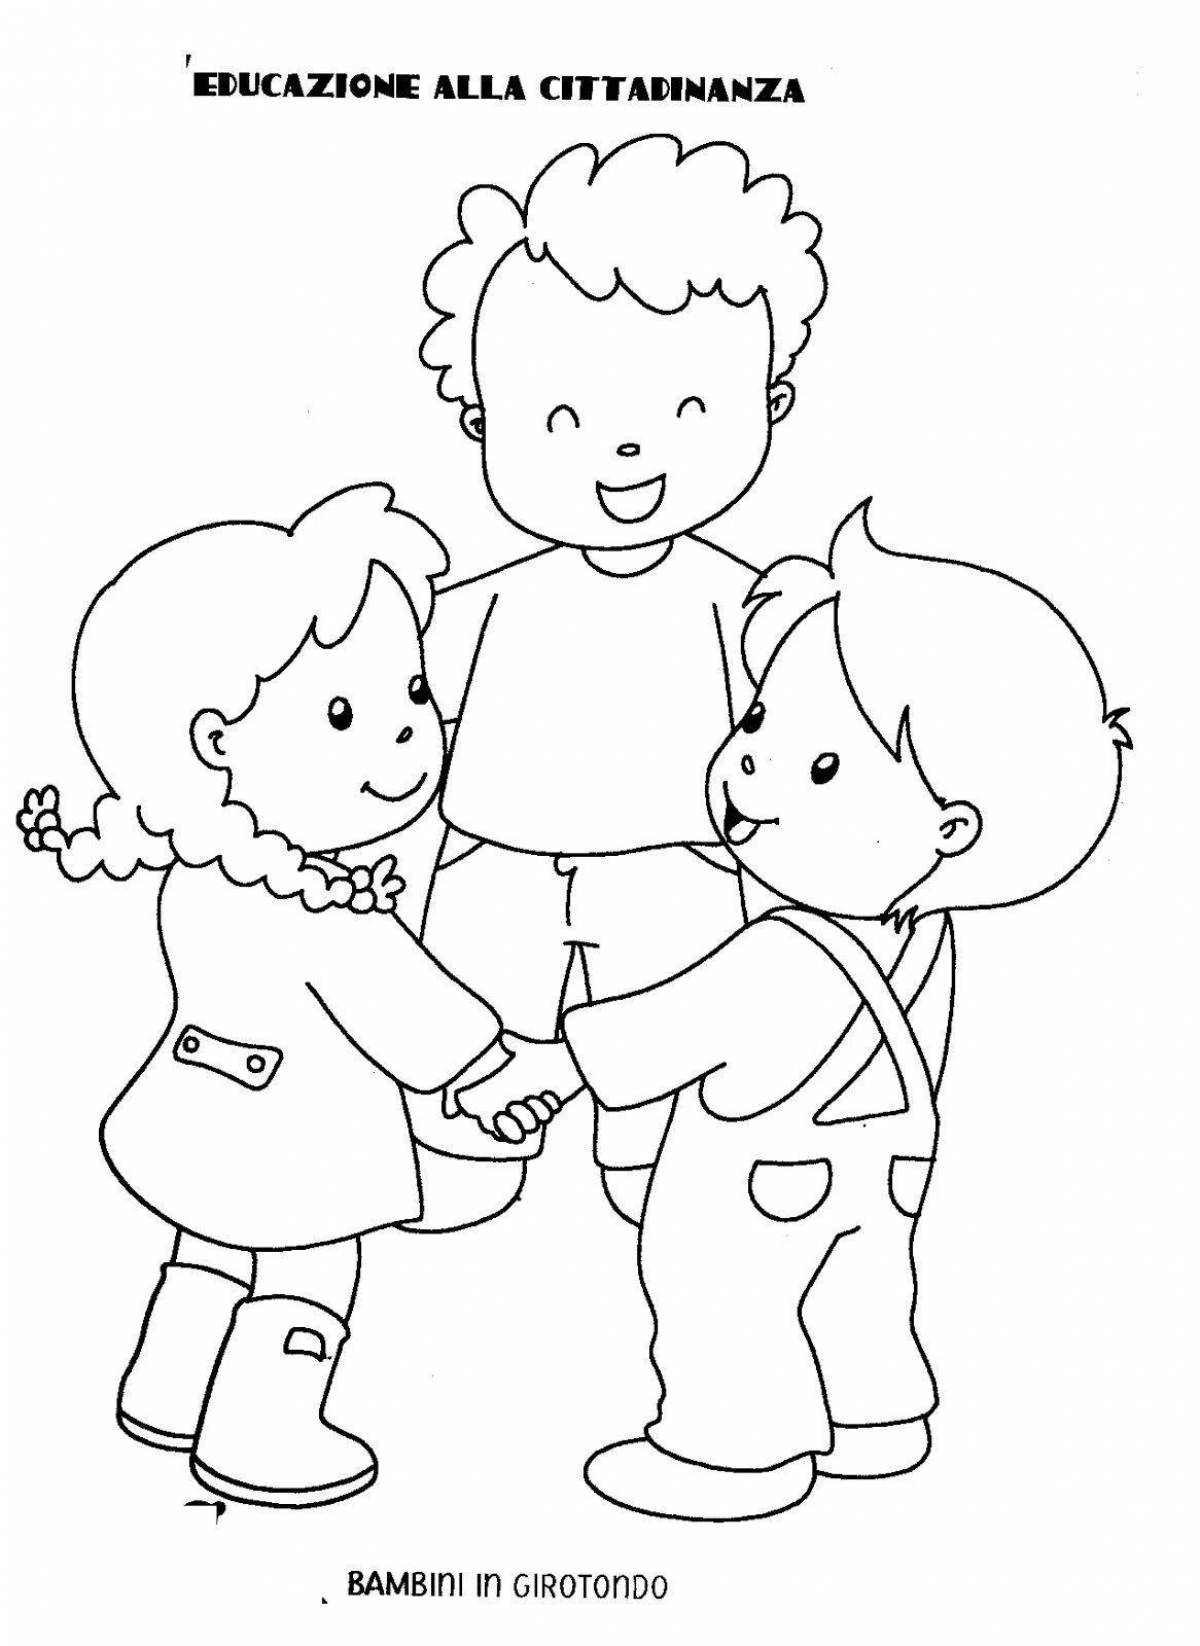 Adorable friendship coloring page